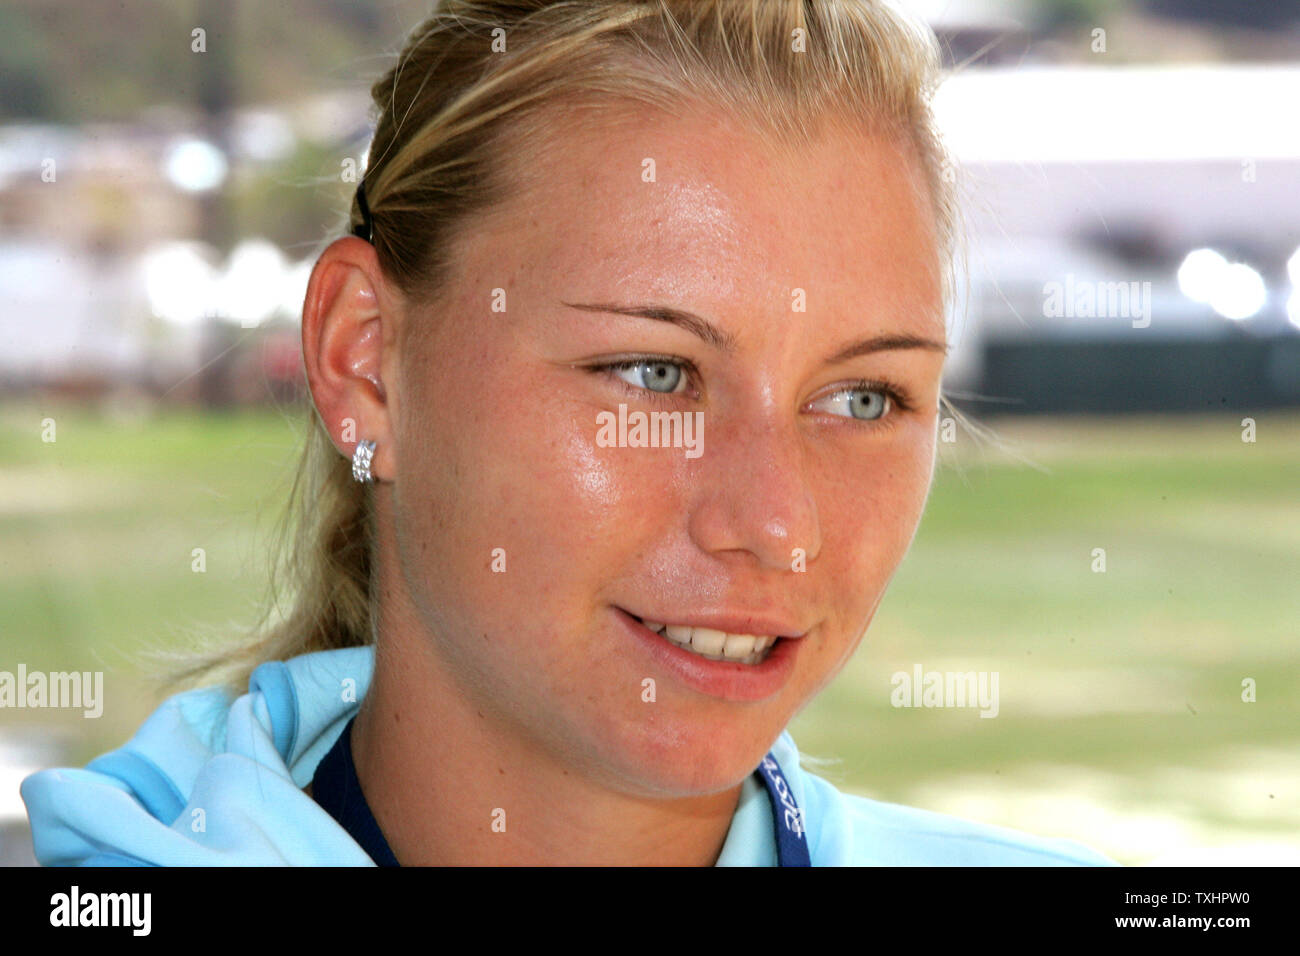 Vera Zvonareva of Russia, currently 16th ranked on WTA Tour, smiles during interviews on media day at Acura Classic women's tennis tournament, Carlsbad, California, USA on August 01, 2005.  Major seeded players Maria Sharapova and Serena Williams have withdrawn due to injuries. While Elena Dementieva, Lindsay Davenport and Kim Clijsters begin competing this week with finals on August 7, 2005. (UPI Photo/Tom Theobald) Stock Photo